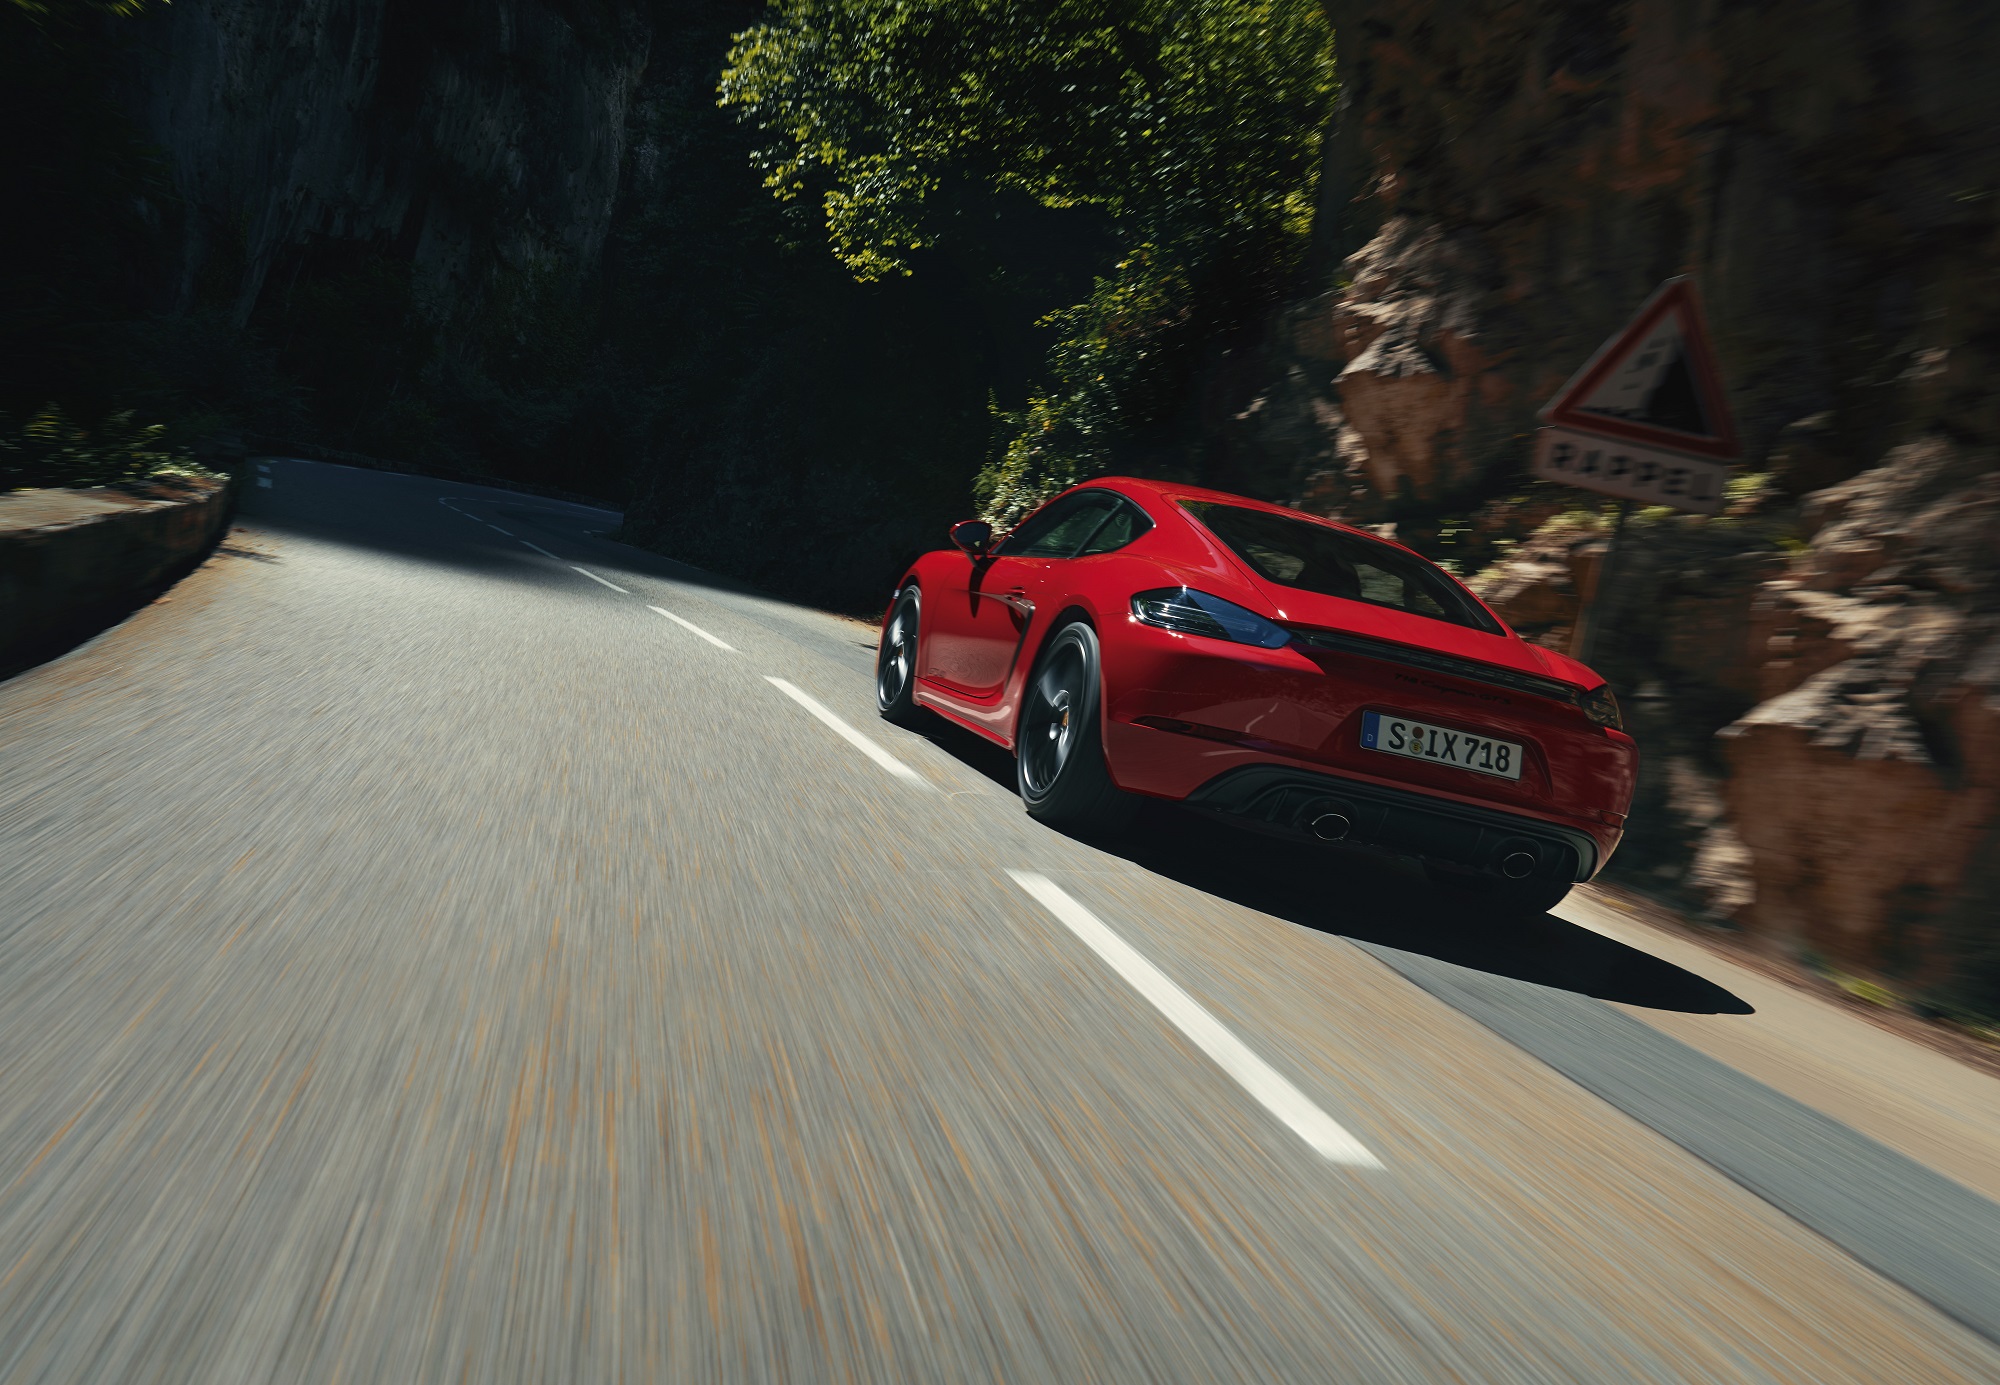 The Cayman is a serious driver's car and one of the best fun cars on the market.